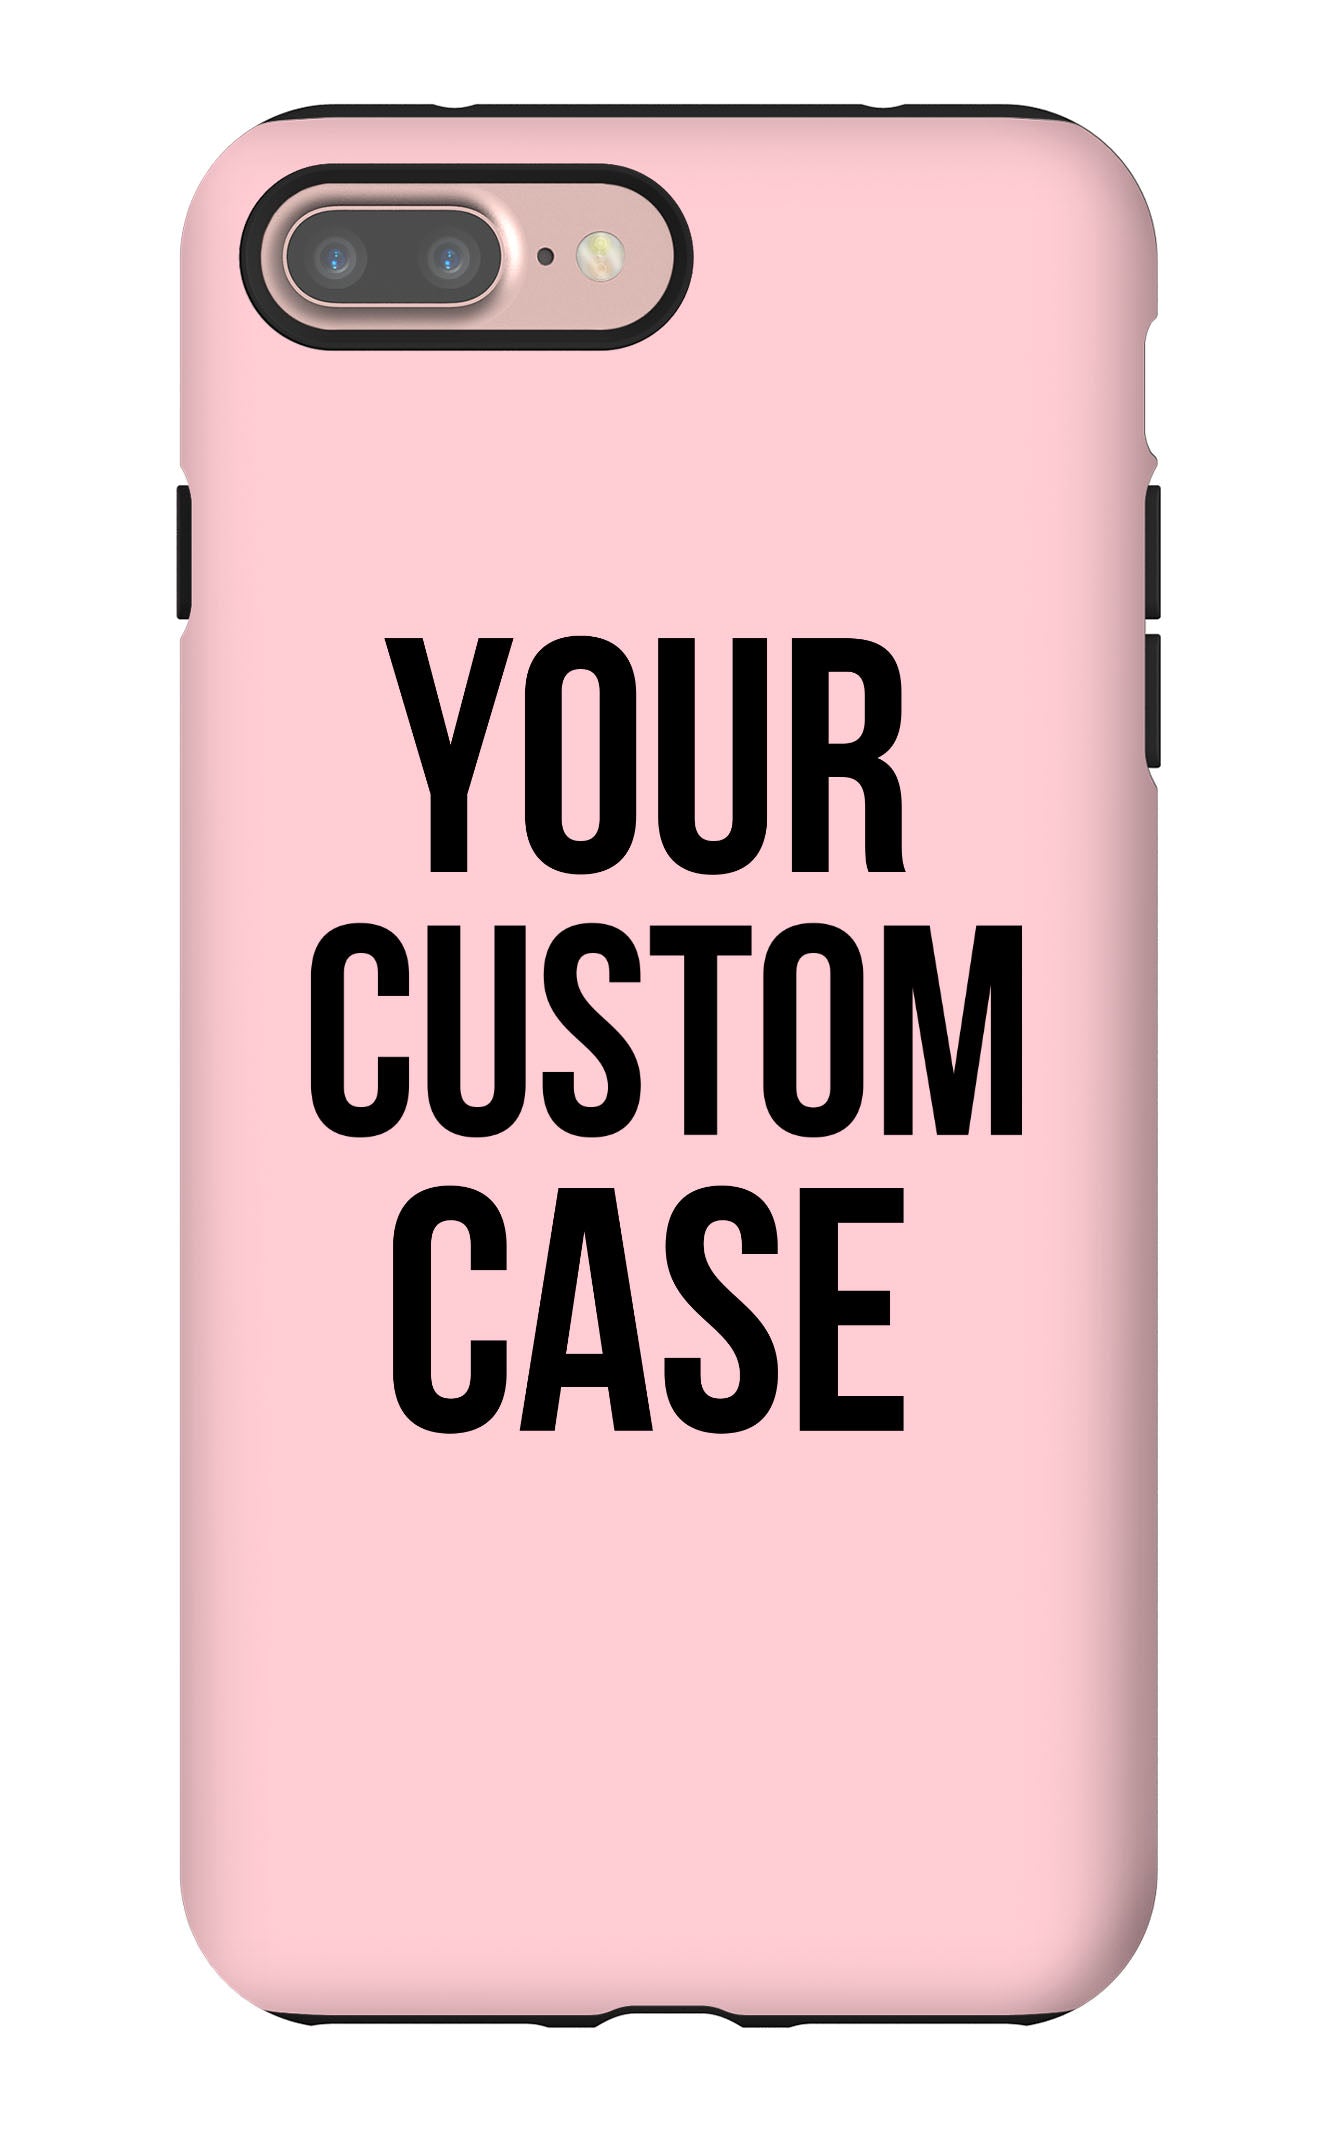 Custom iPhone 7 Plus Extra Protective Bumper Case - Your Custom Design in Cart will be Shipped - Pixly Case